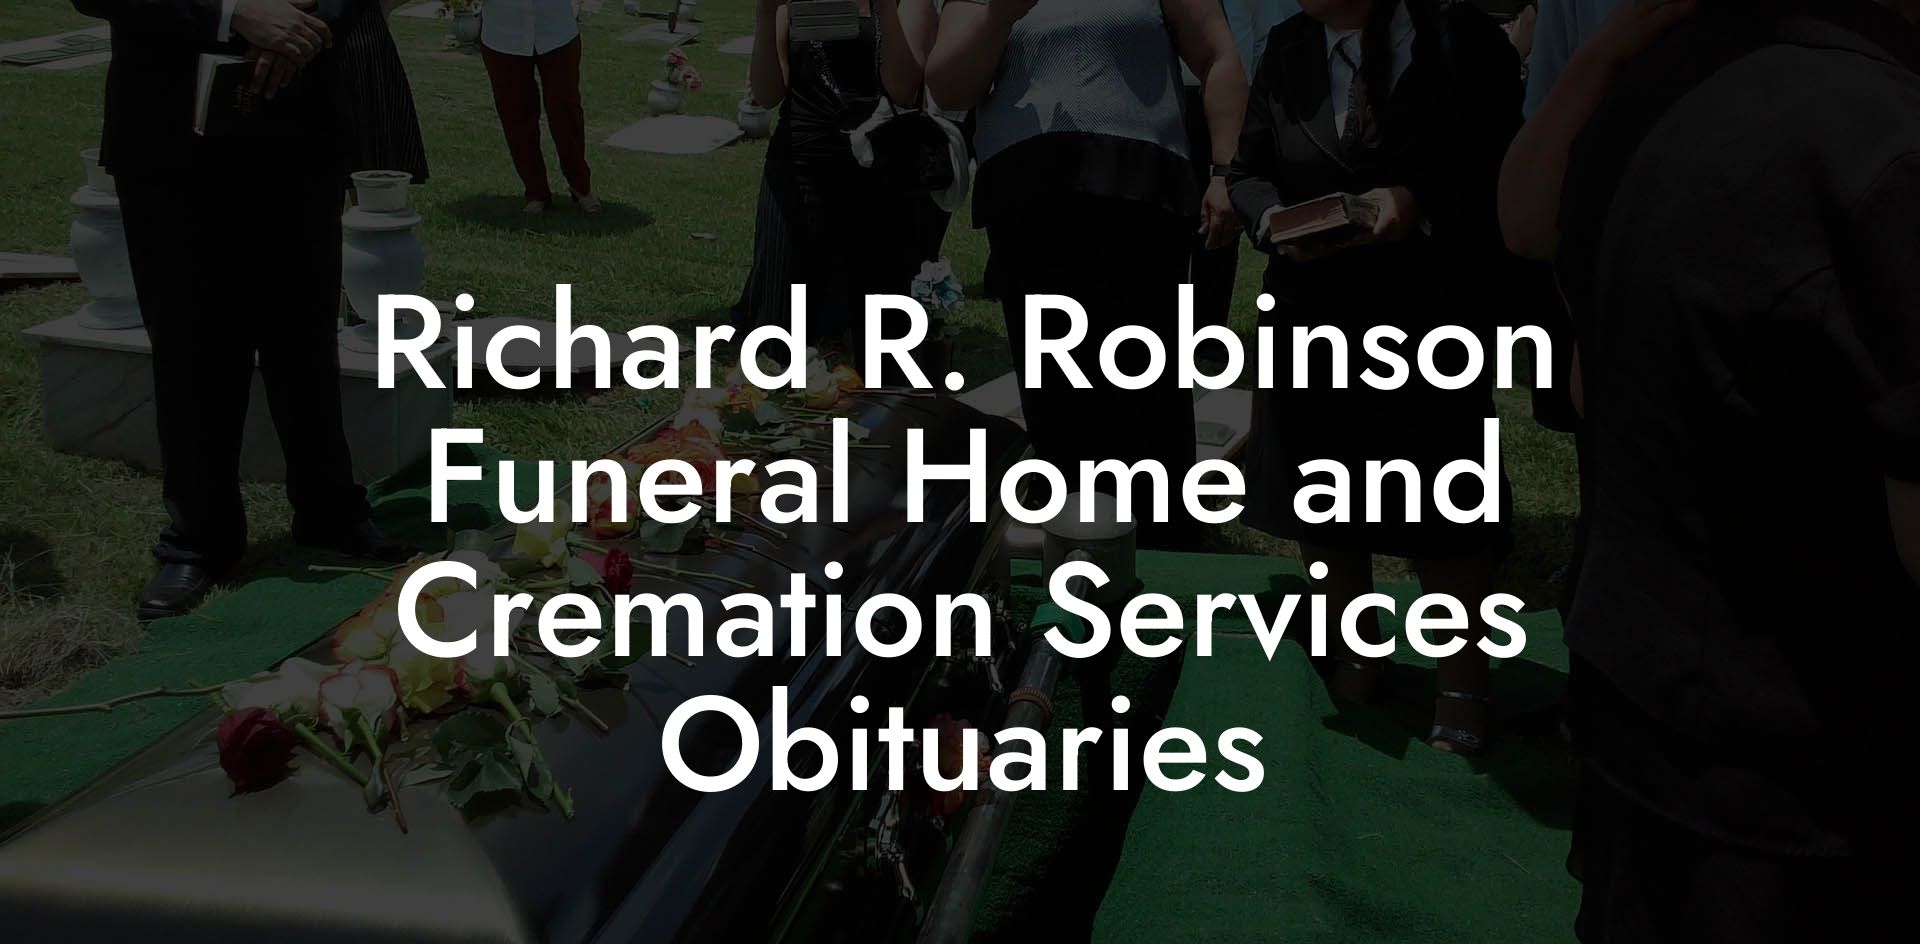 Richard R. Robinson Funeral Home and Cremation Services Obituaries